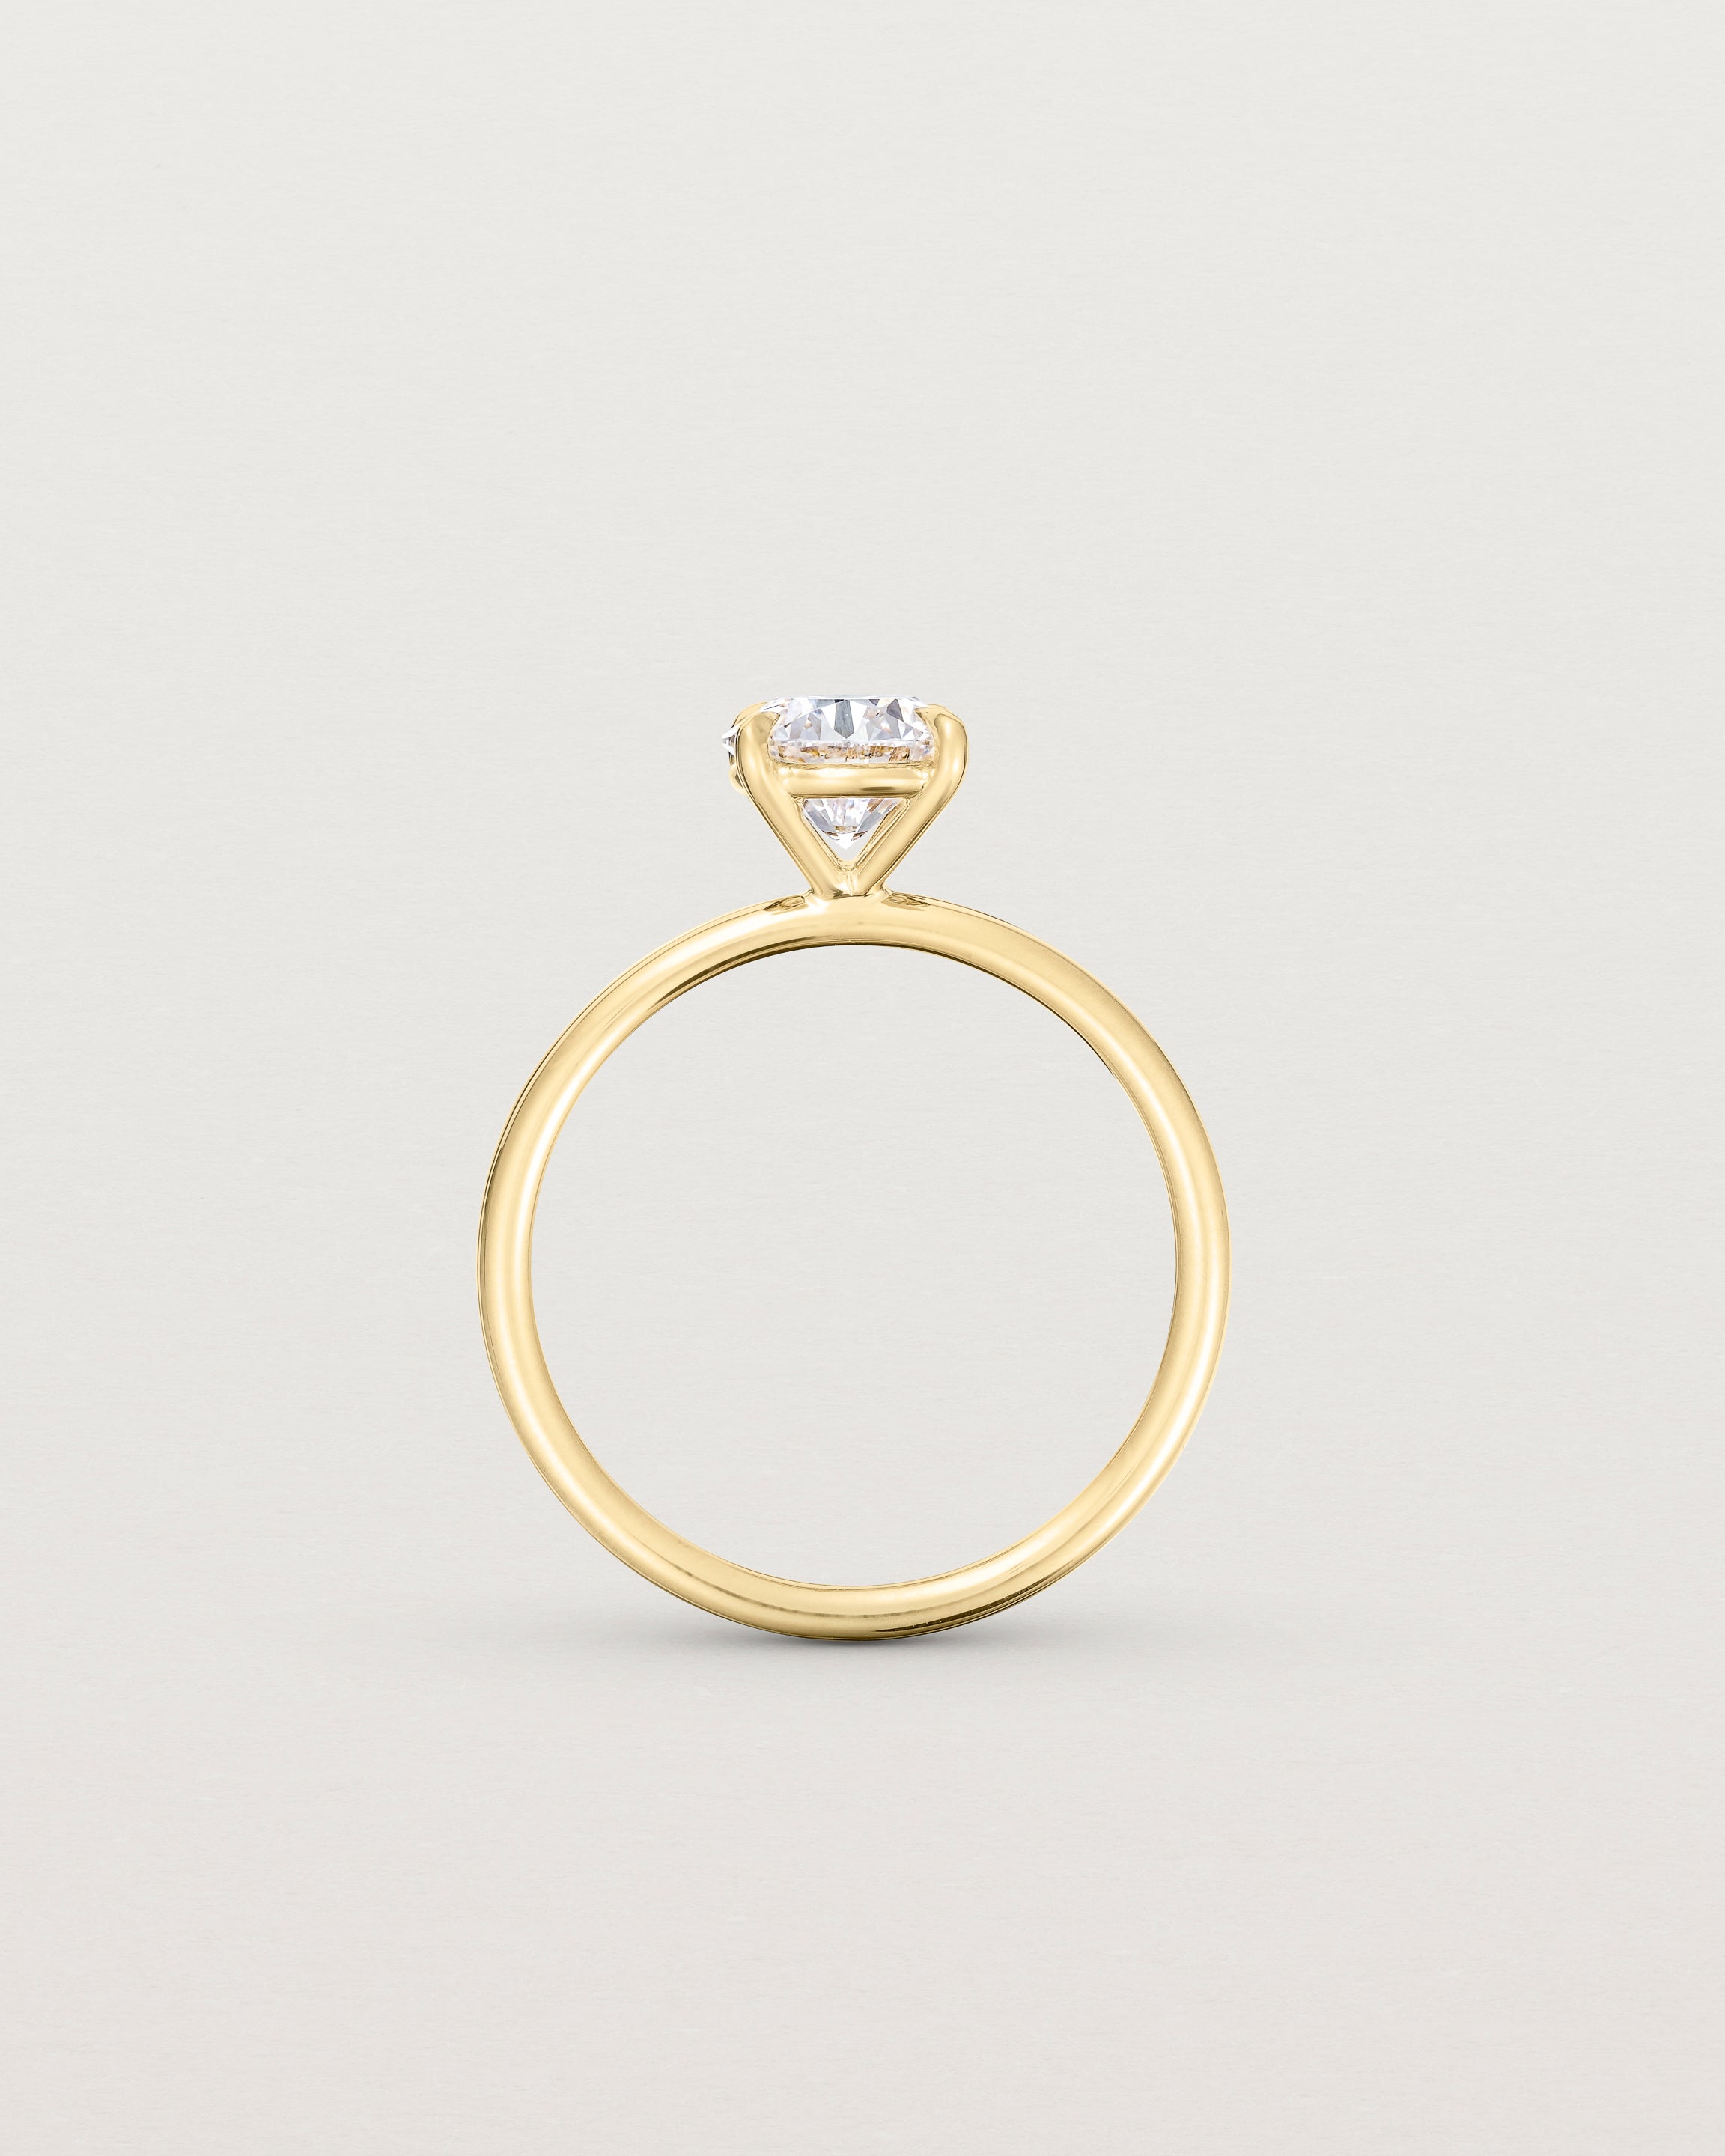 Standing view of the No. 113 Signature Solitaire | Diamond.